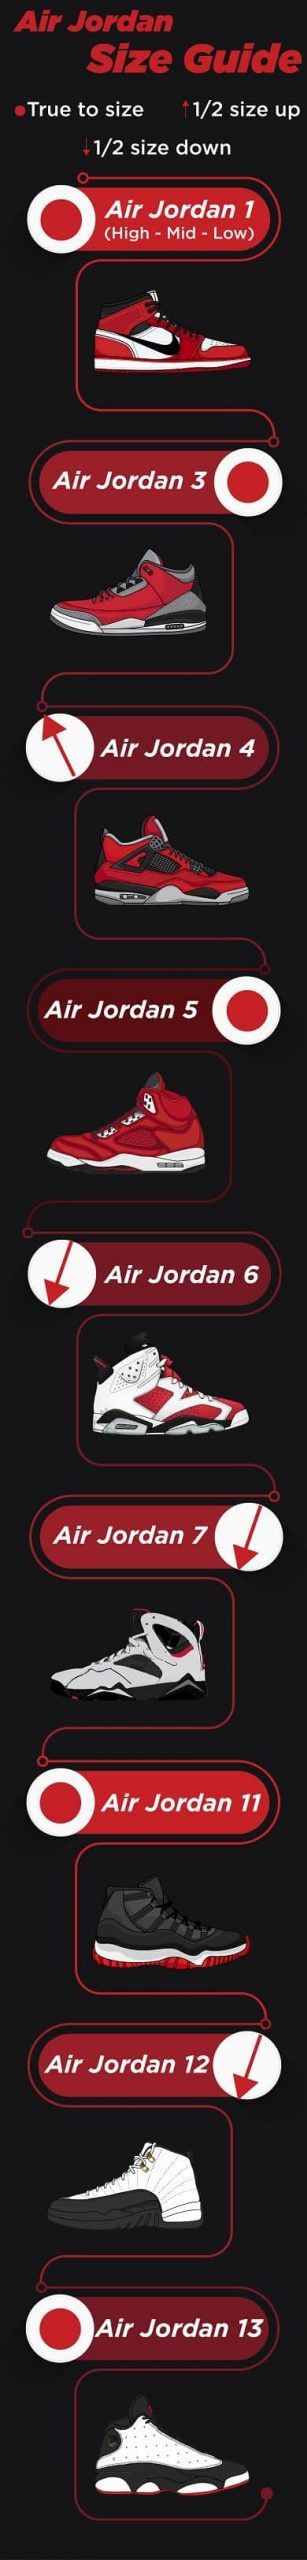 How Does The Air Jordan 11 Fit?, [Complete Fit And Sizing Guide]